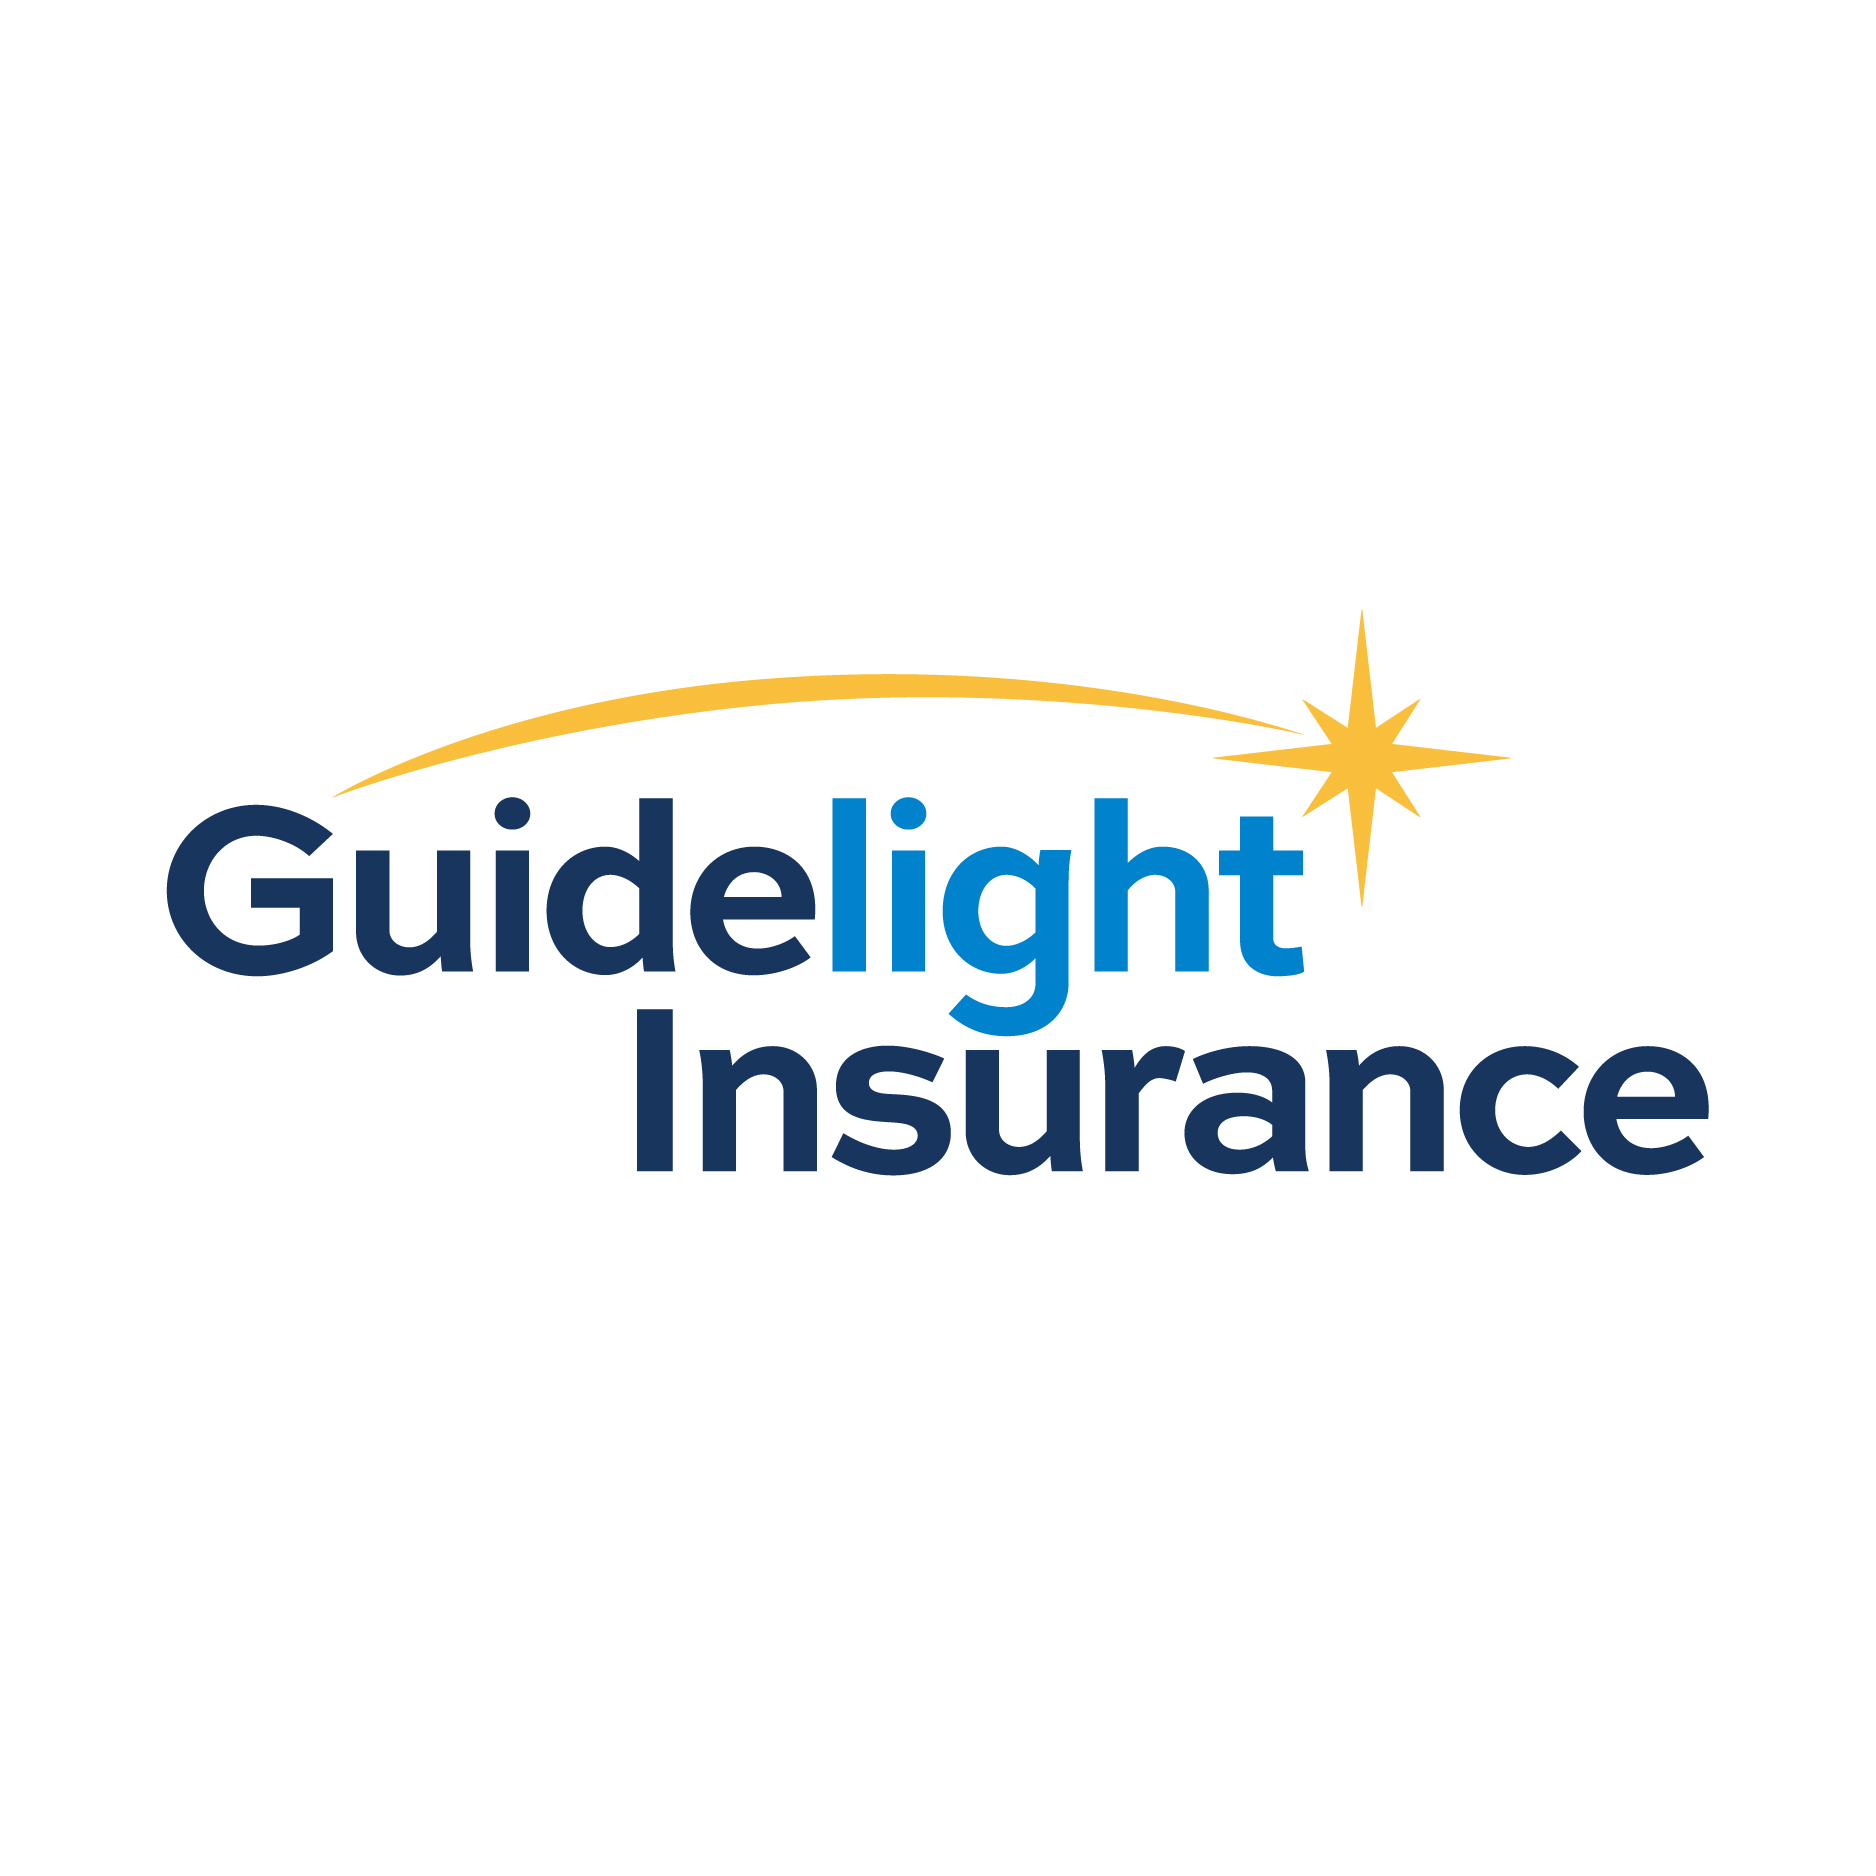 Guidelight Insurance logo design by logo designer Figmints Delicious Design for your inspiration and for the worlds largest logo competition